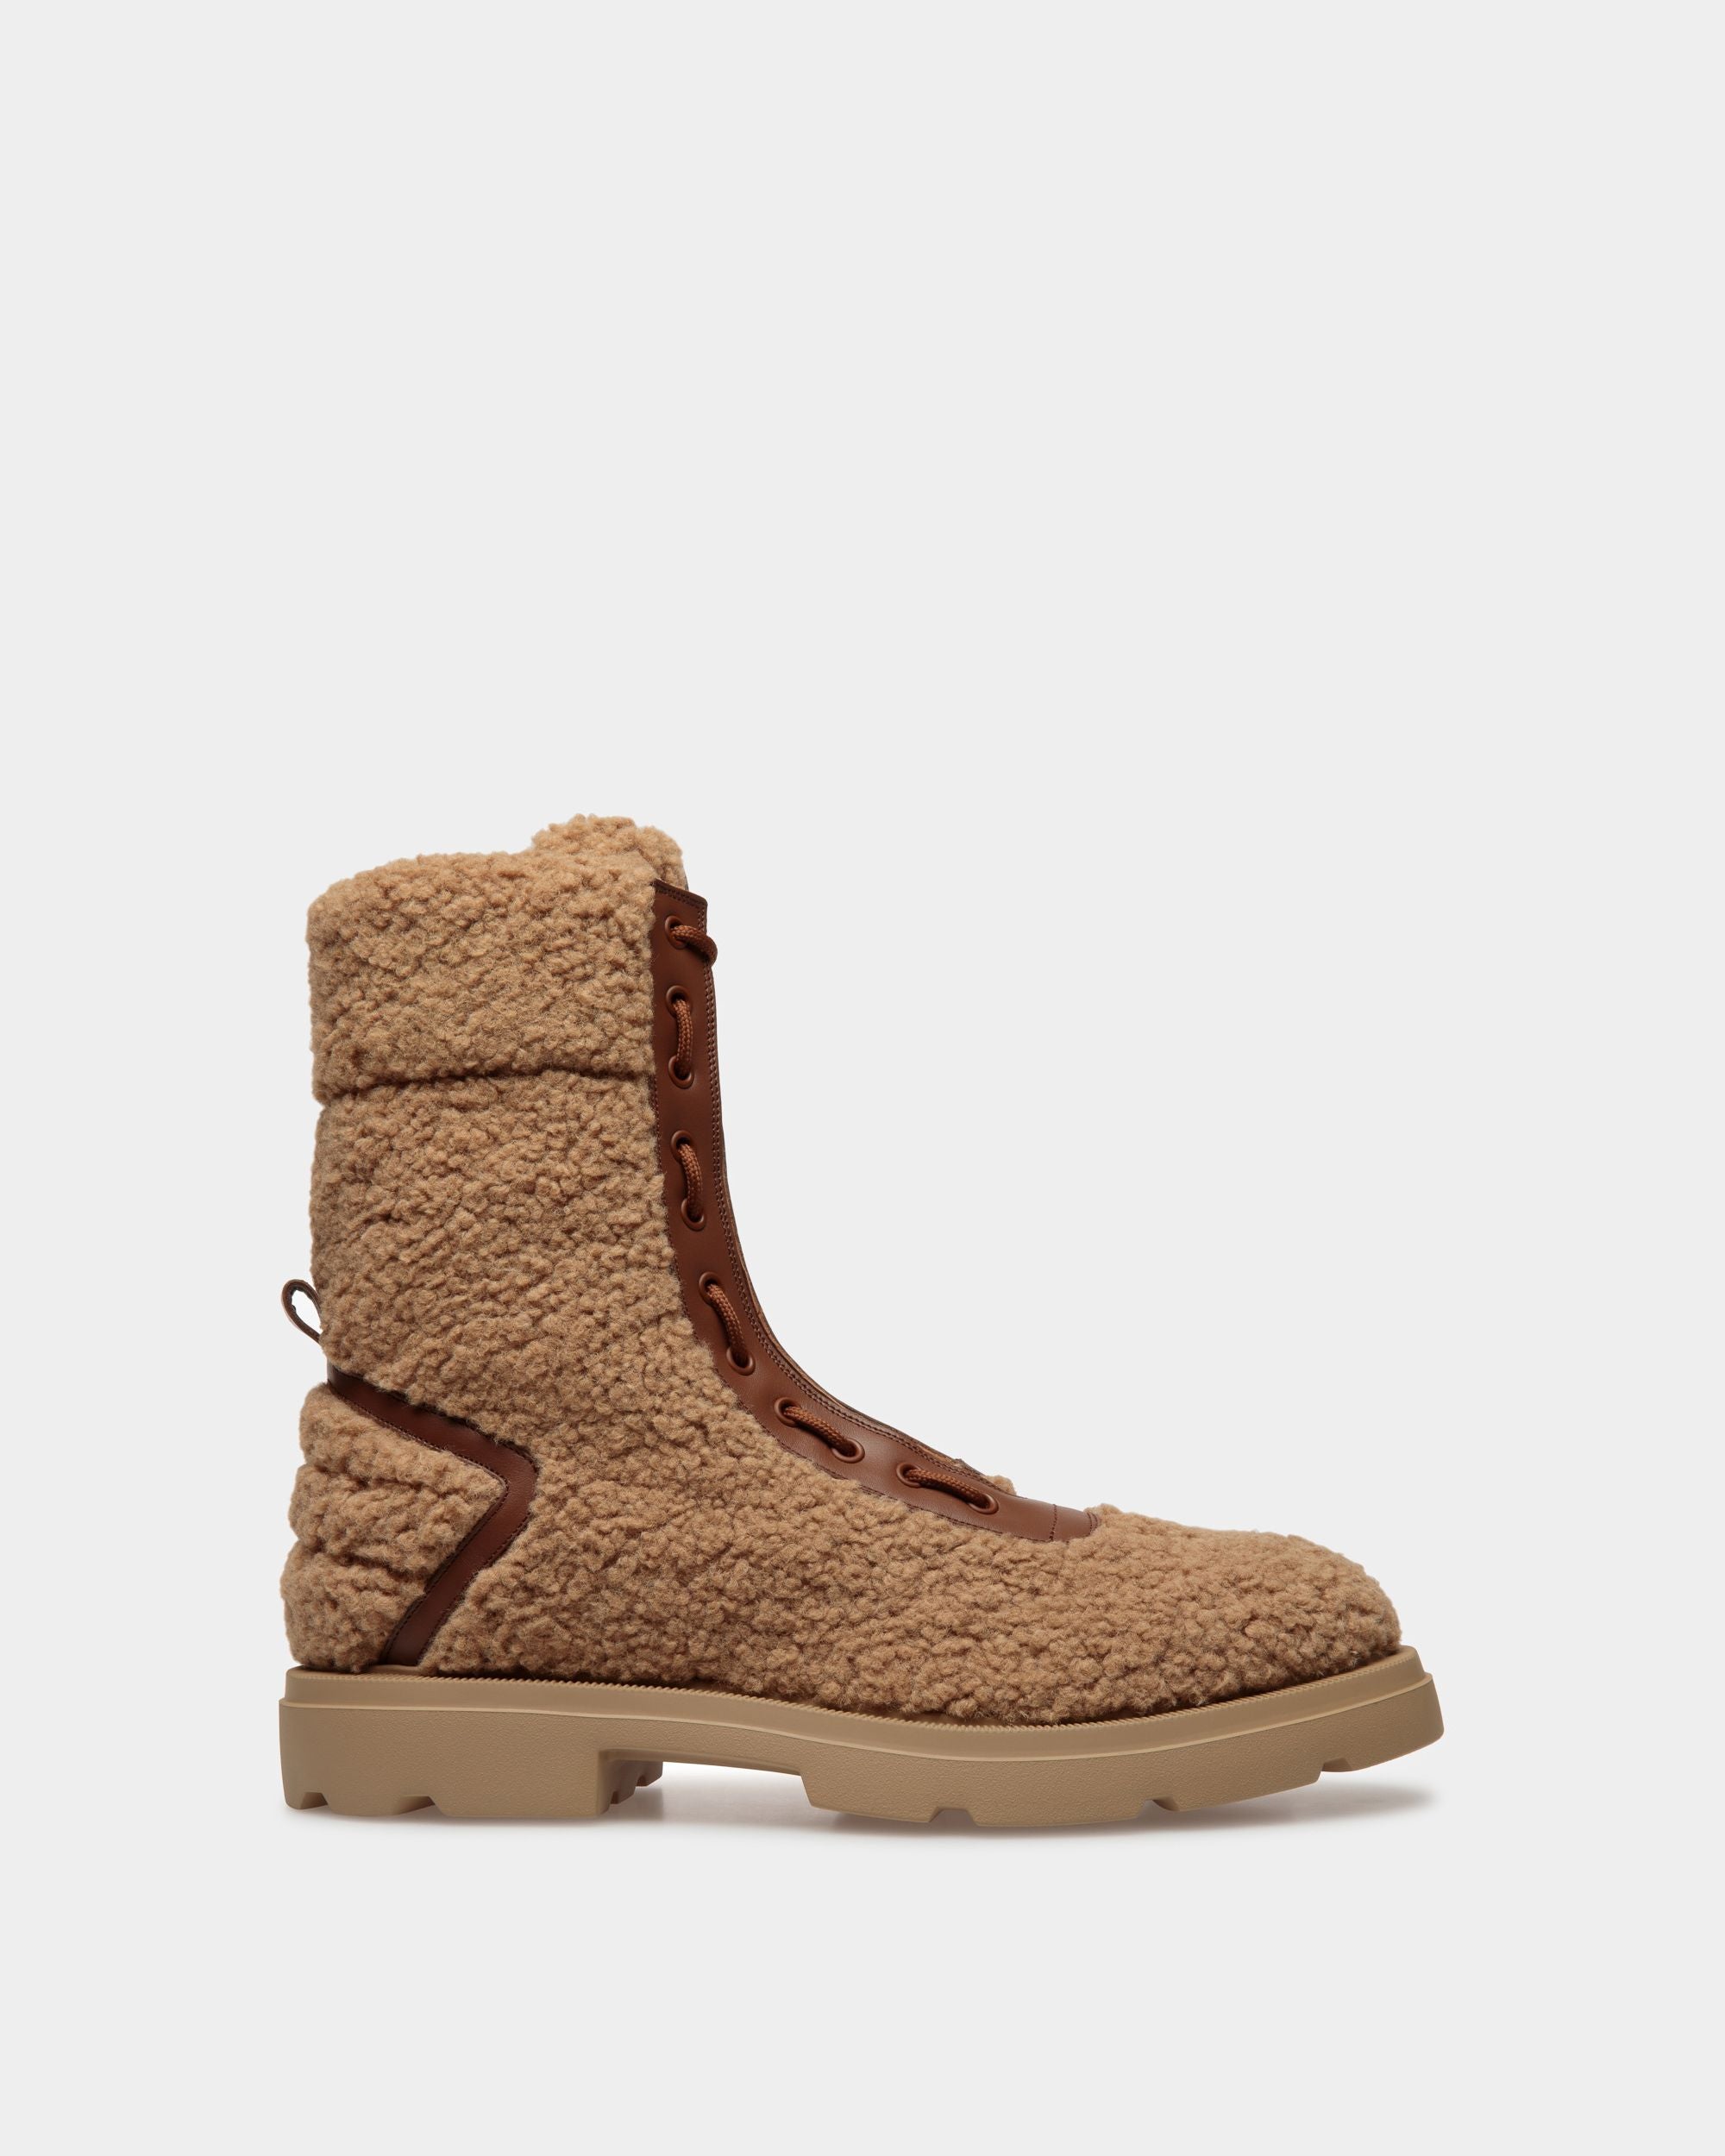 Zendi | Men's Boots | Brown Fabric And Leather | Bally | Still Life Side